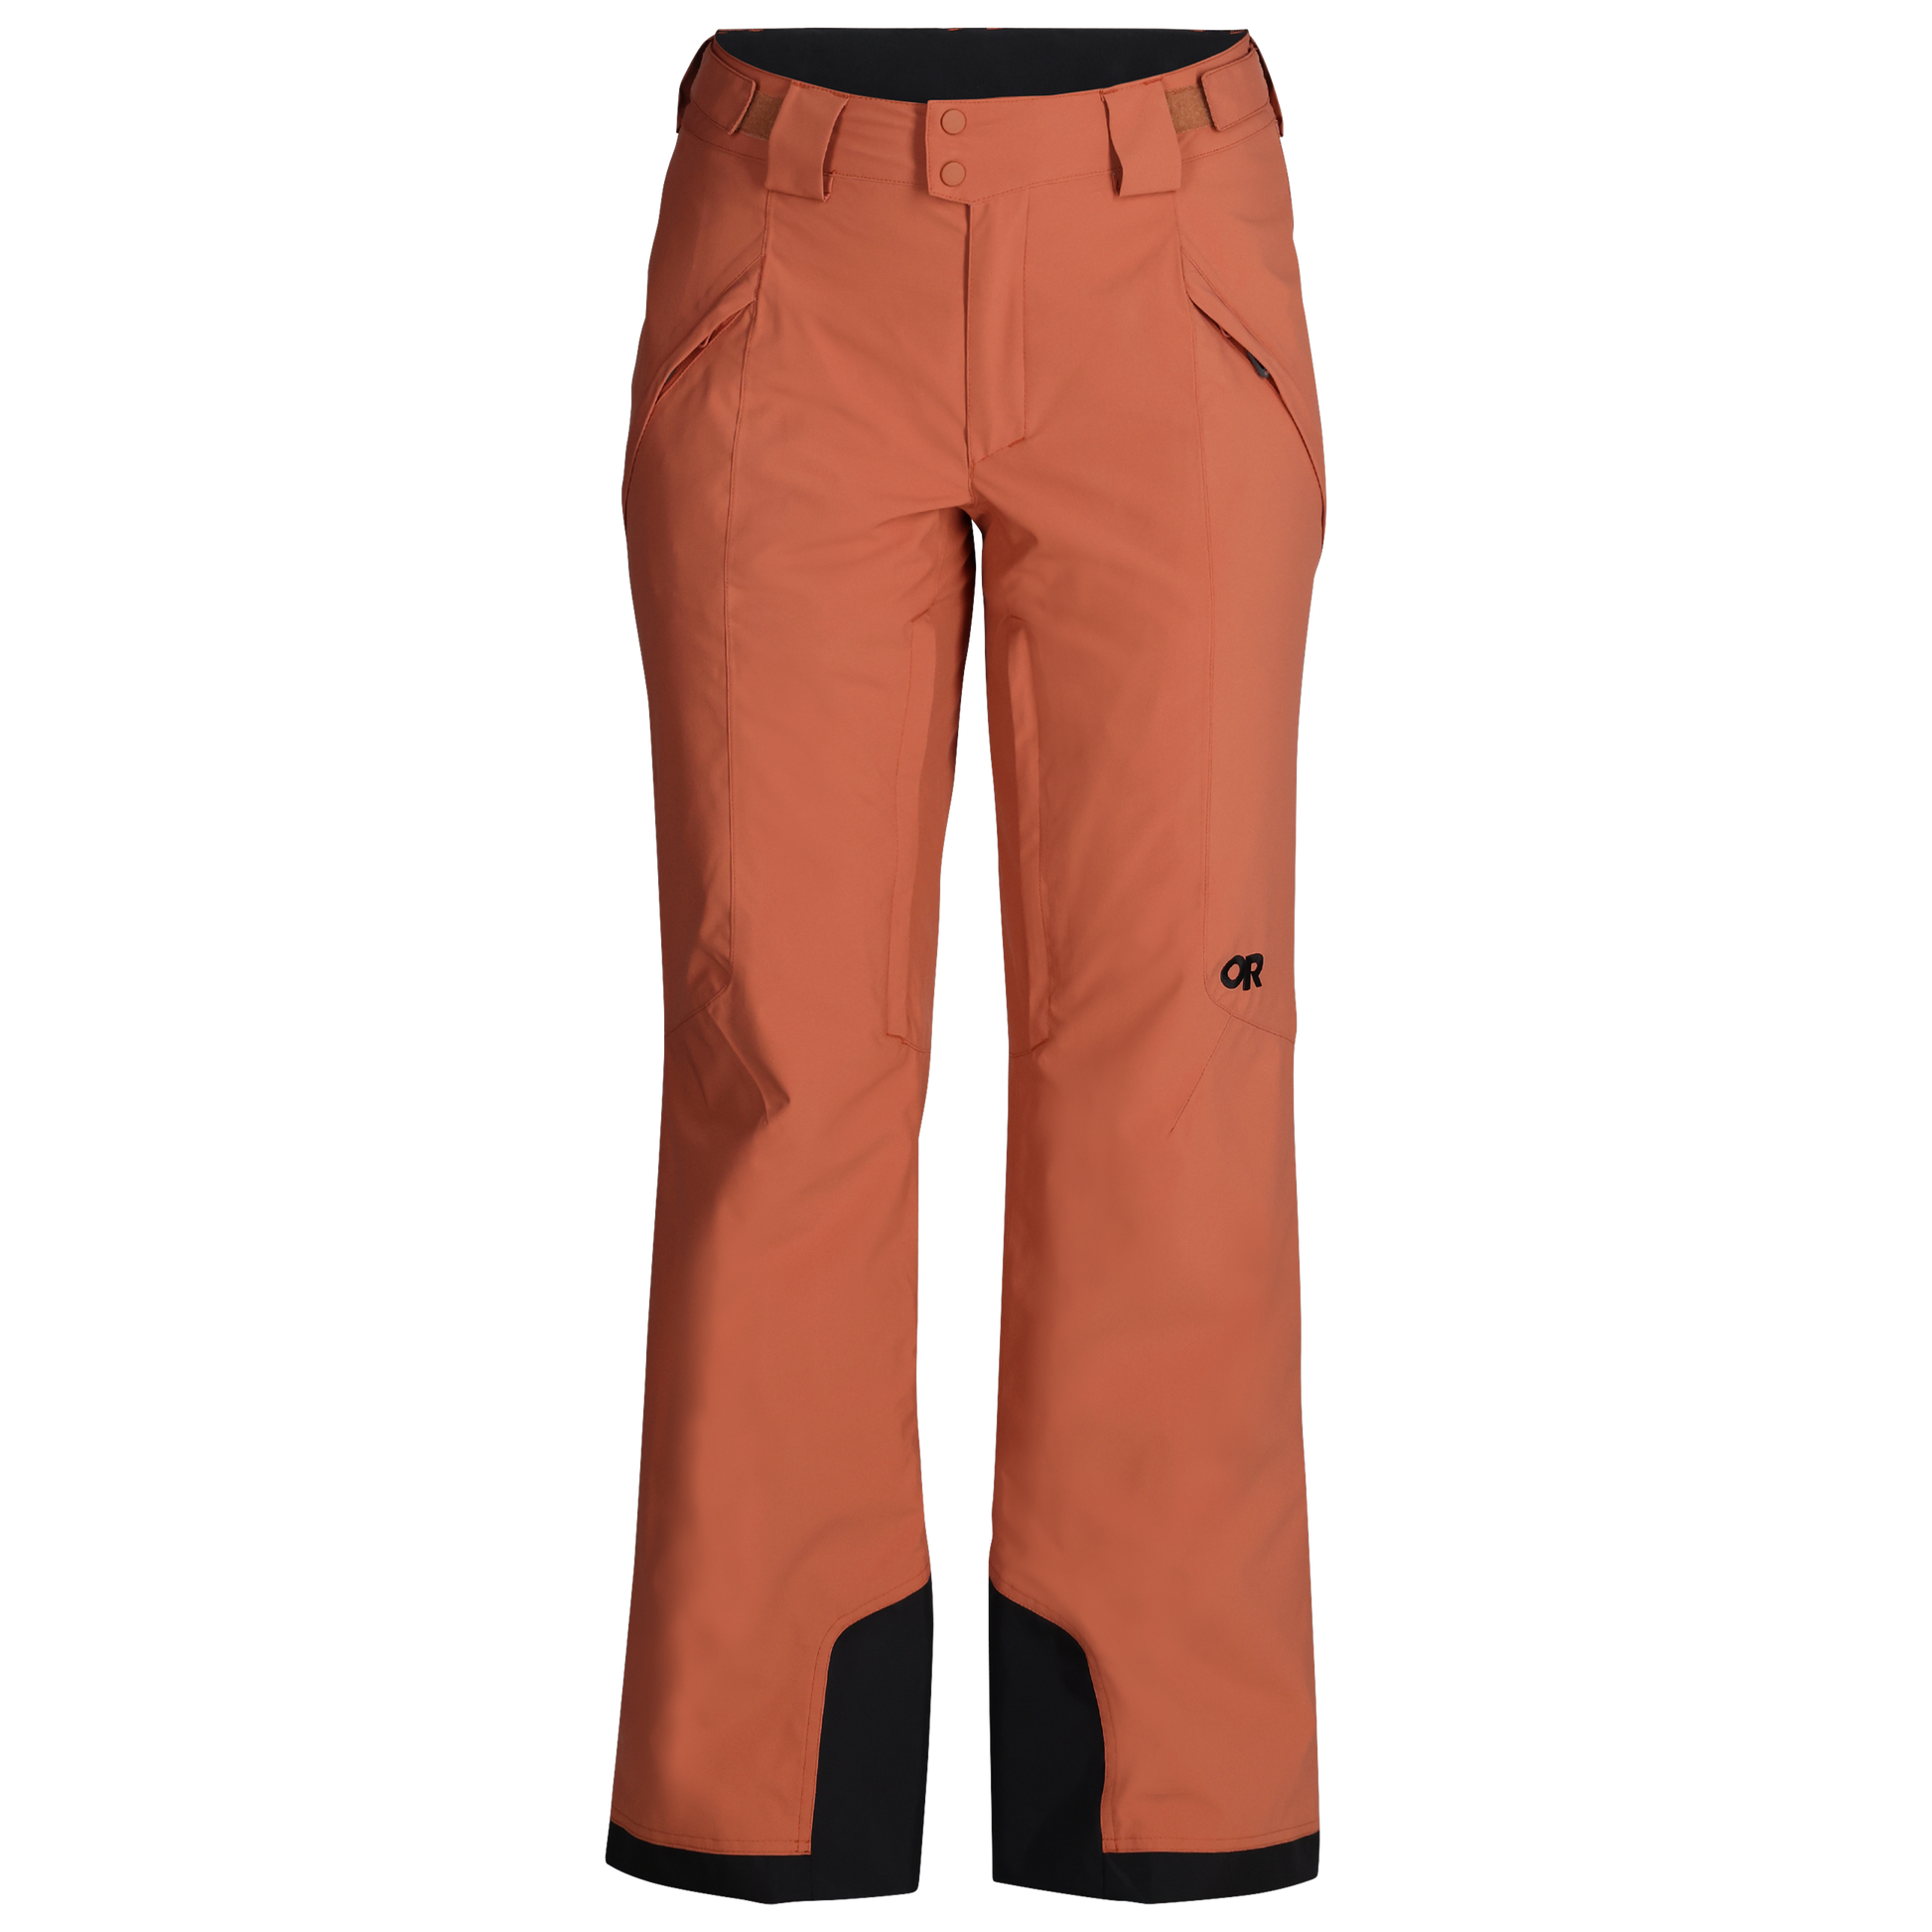 M's Snow Guide Pants - The Benchmark Outdoor Outfitters